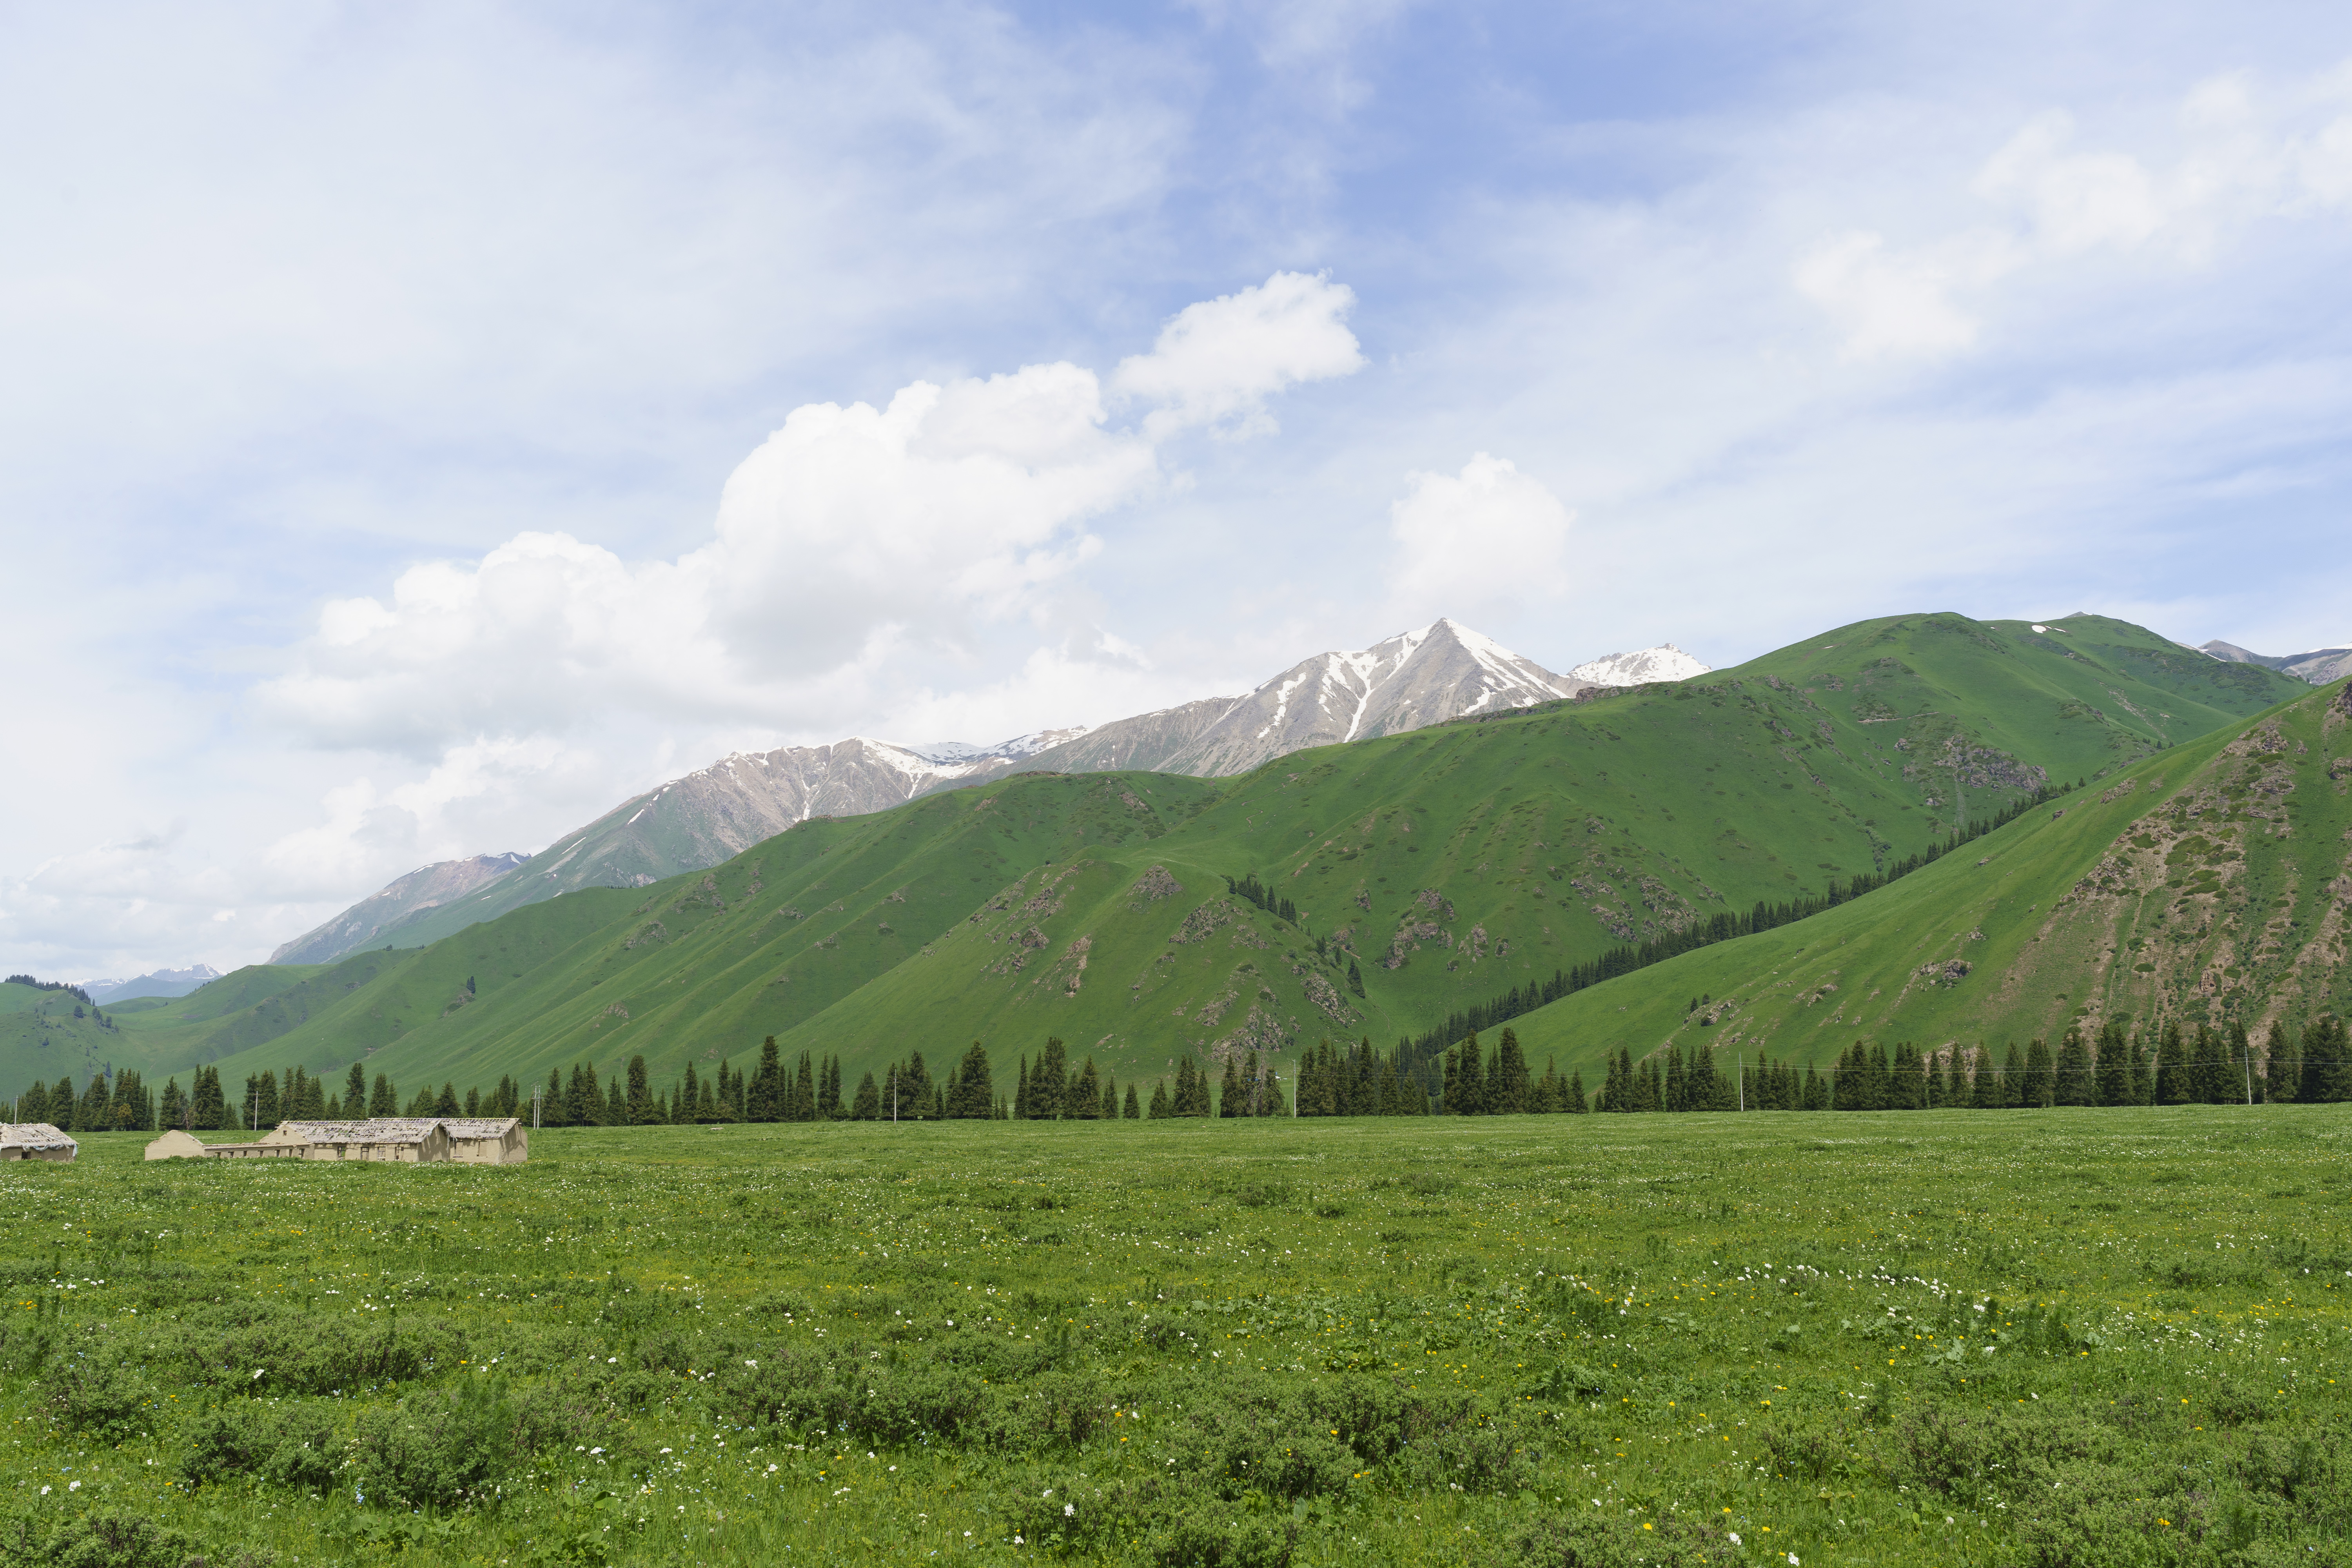 General 6000x4000 grass mountains snowy peak landscape pine trees Xinjiang Duku Highway China nature clouds sky skyscape snow trees